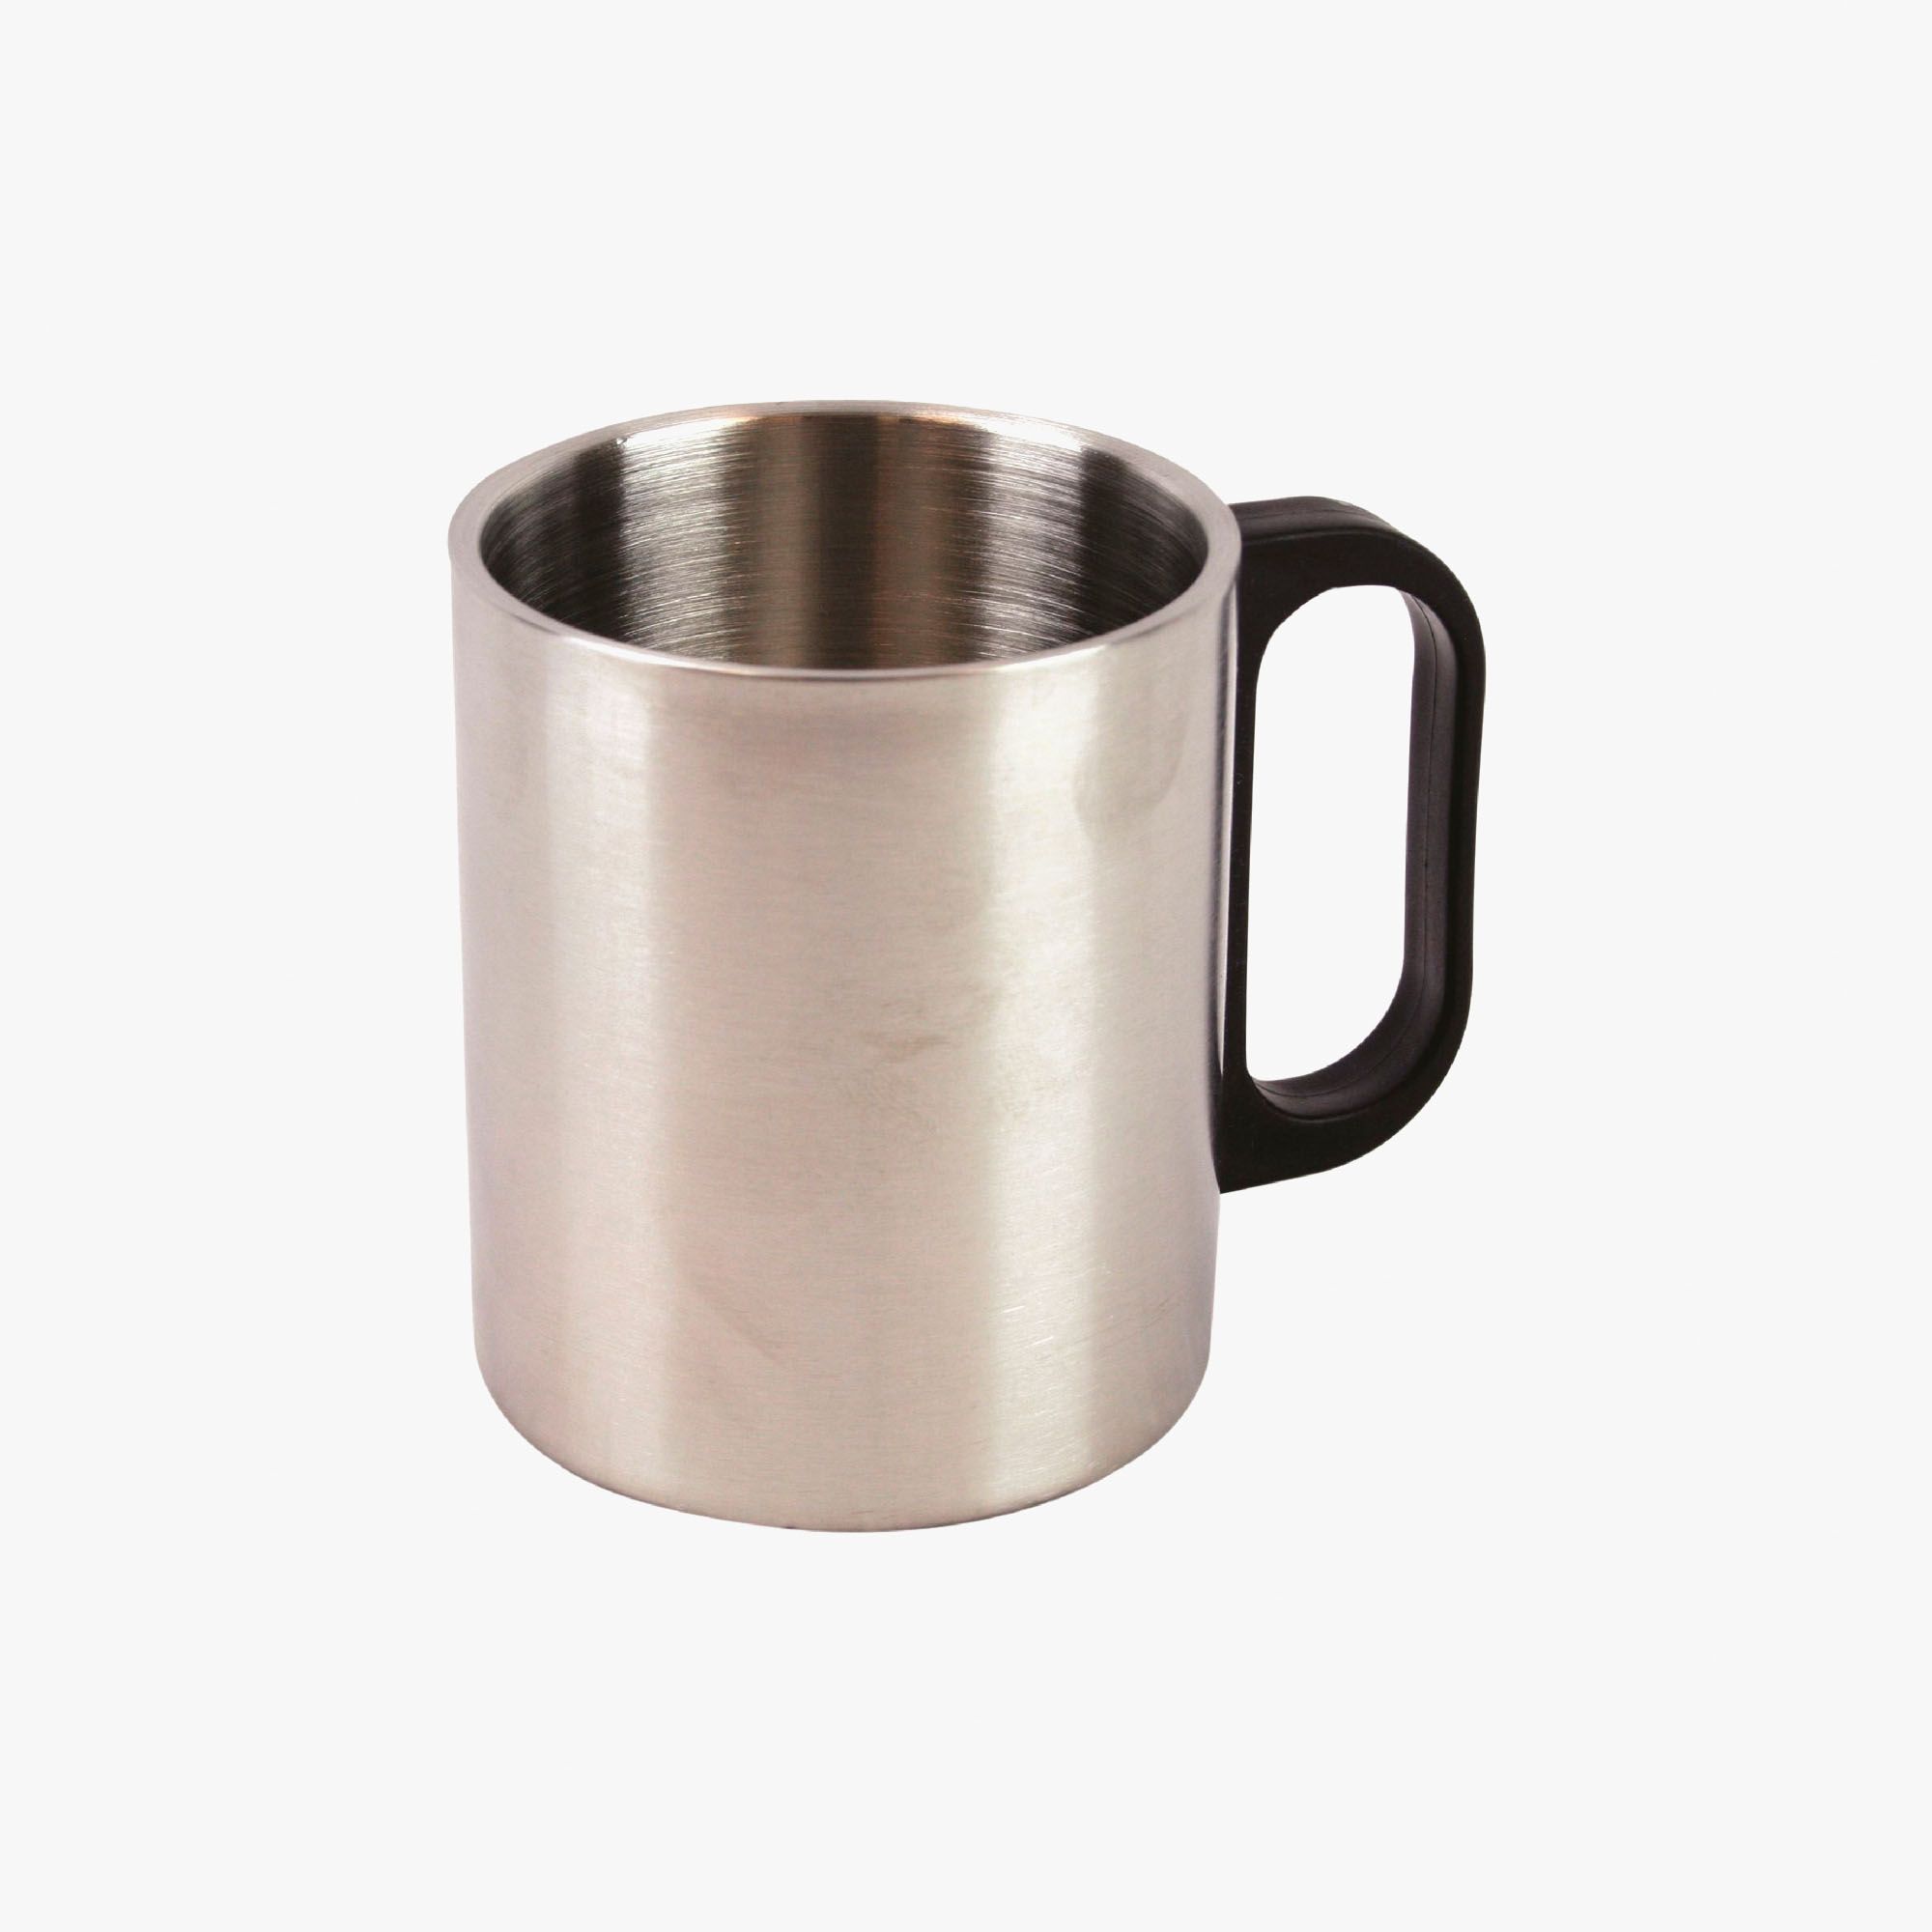 Stainless Steel Insulated Mug - The Expert Camper